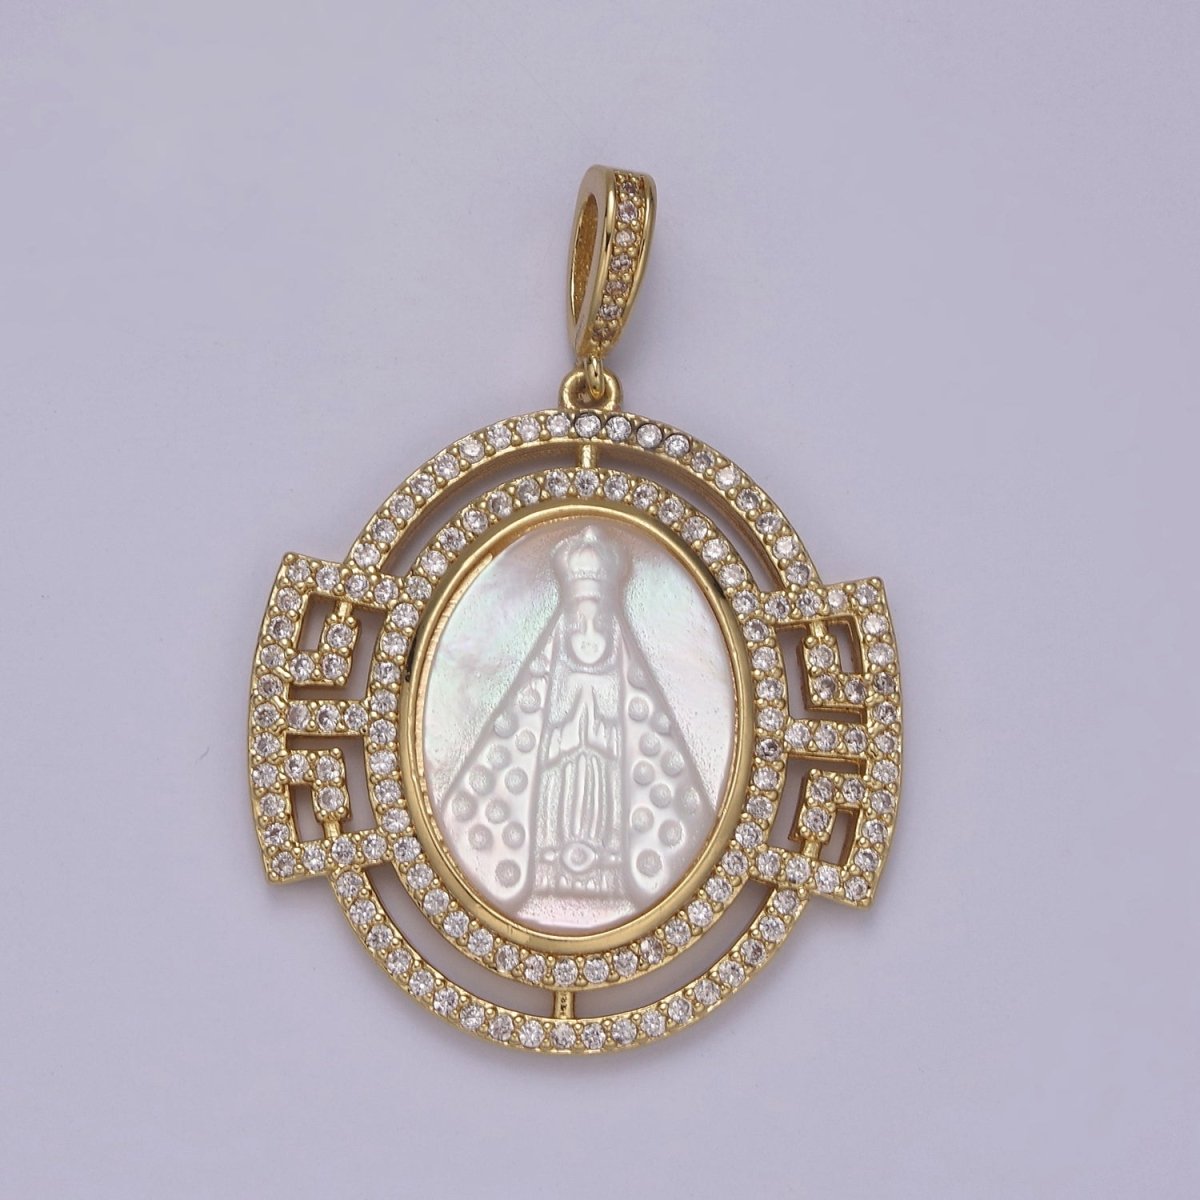 Bold Chunky Medallion Gold Filled Cubic Zirconia Mother Of Pearl Virgin Mary Lady of Guadalupe Pendant Necklace for Religious Jewelry Making N-575 - DLUXCA